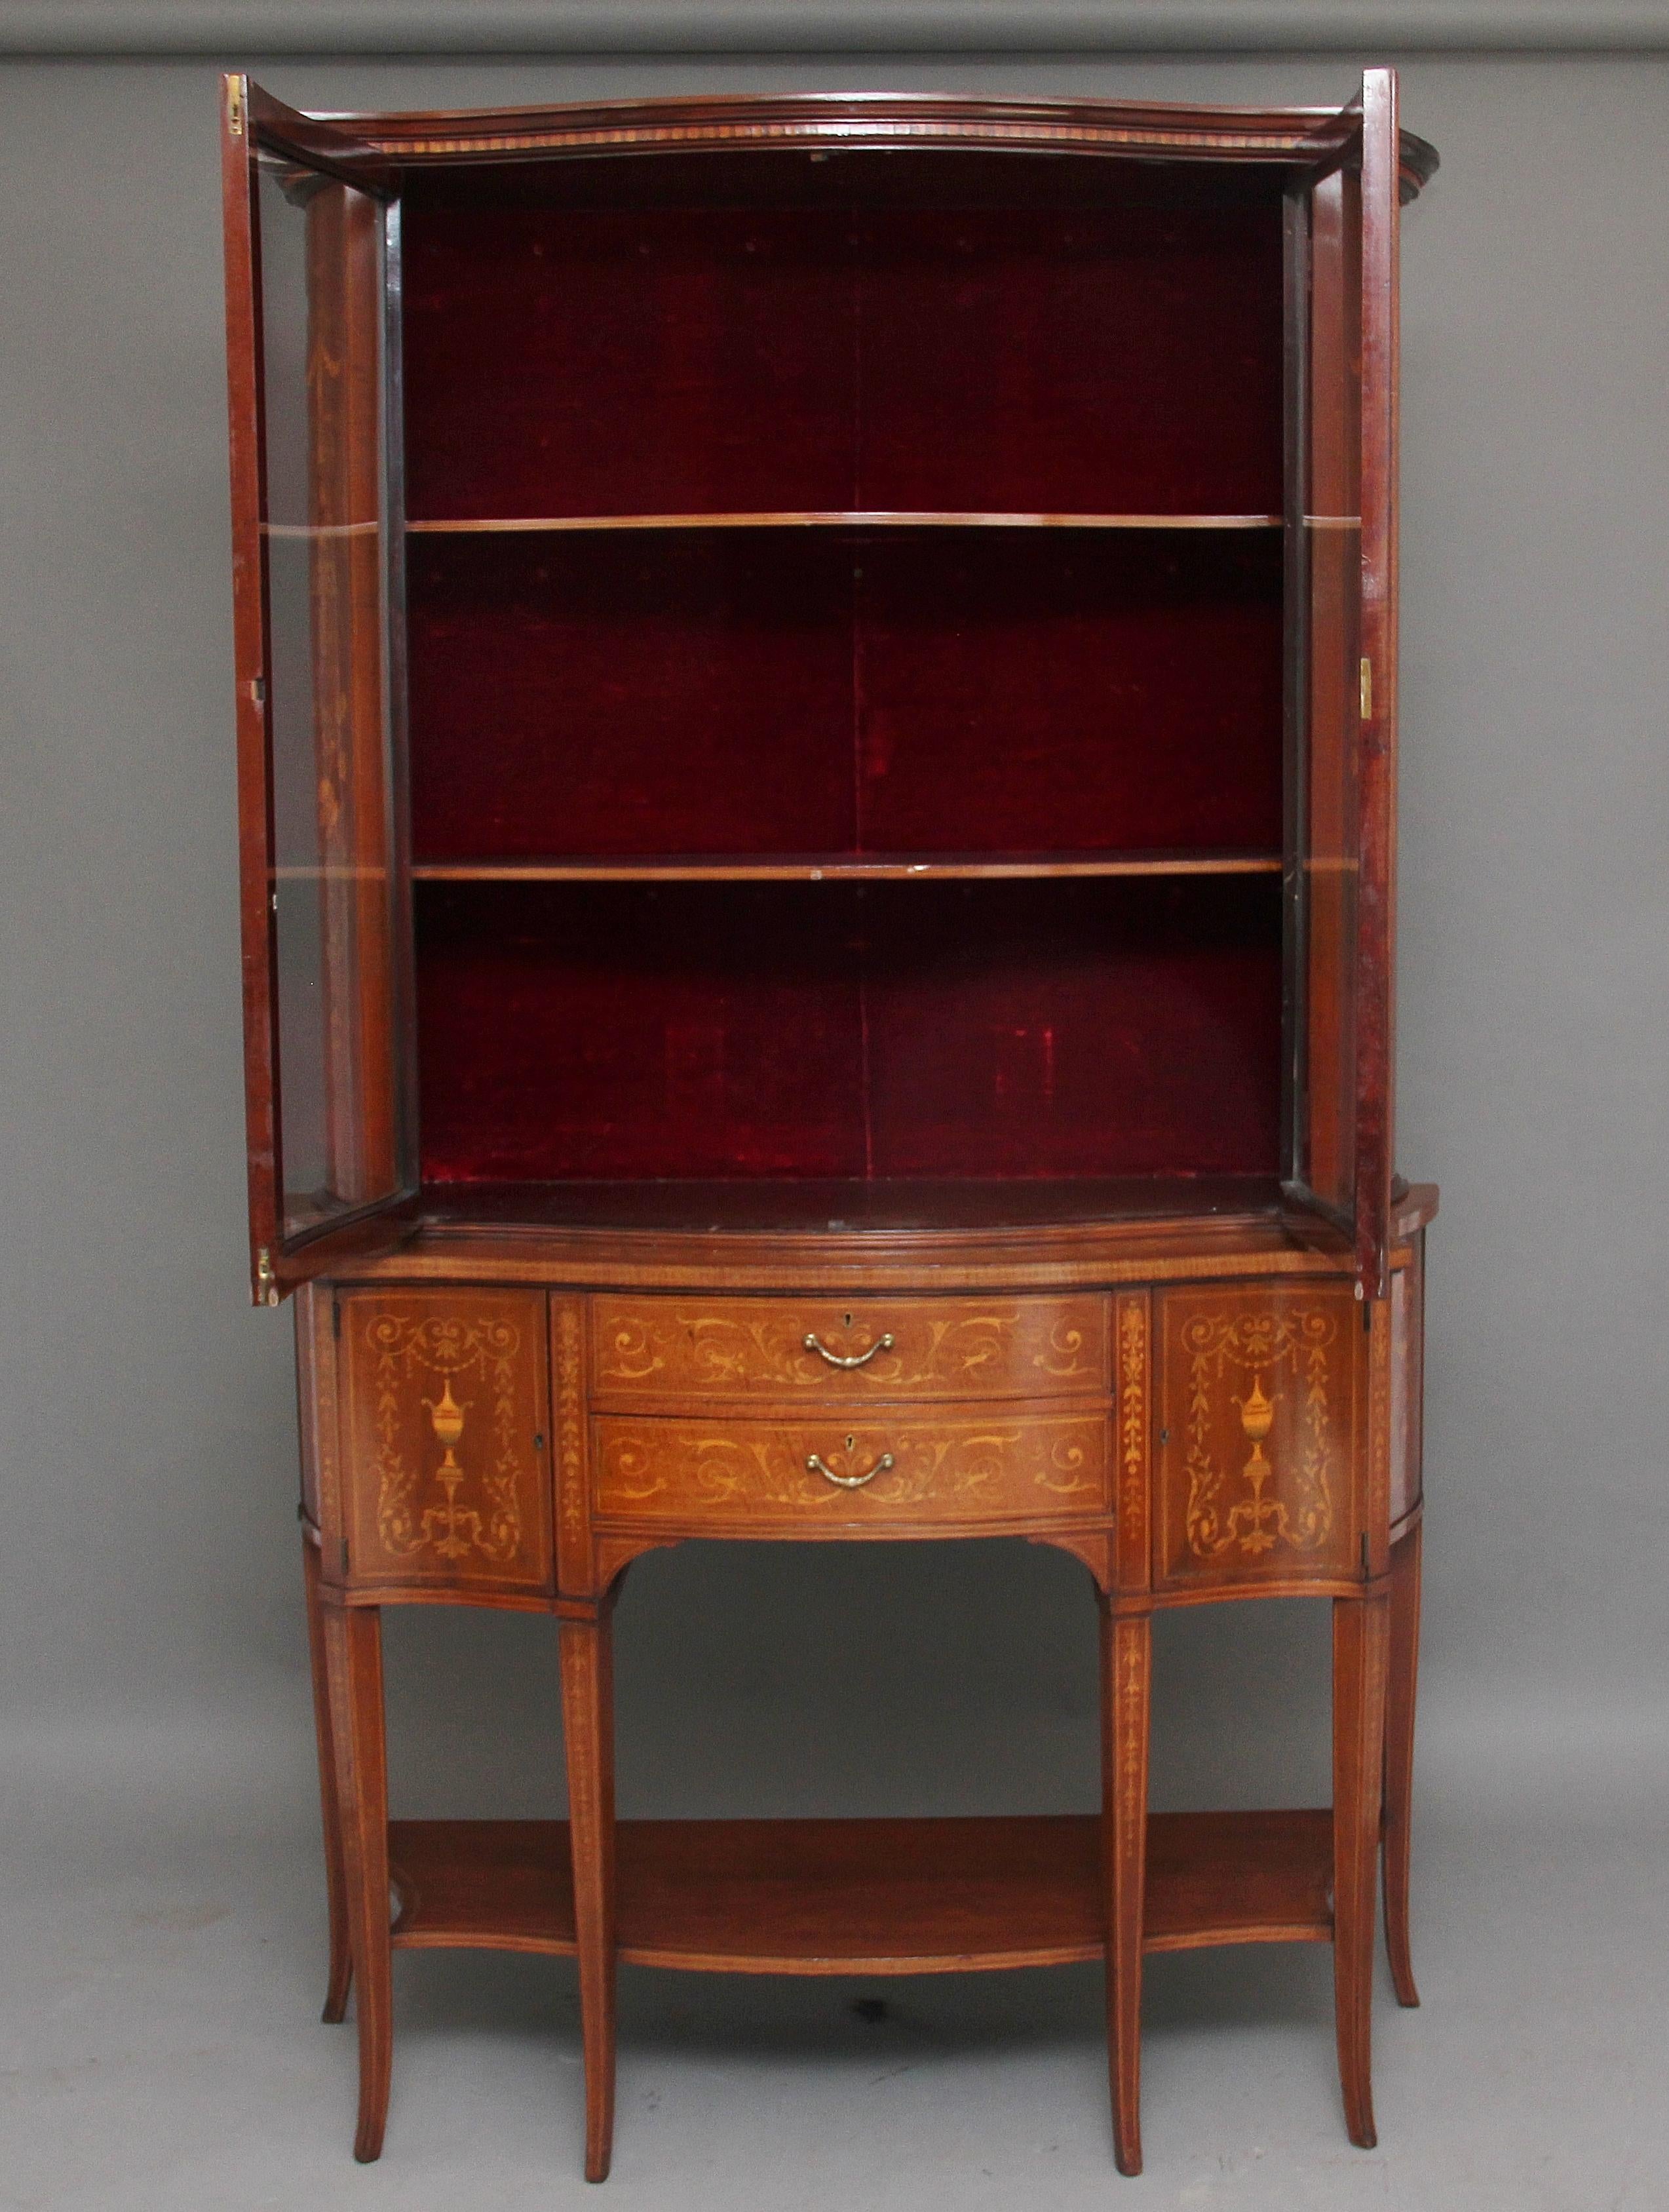 A large 19th century mahogany Sheraton revival inlaid display cabinet of serpentine form, the shaped cornice above two serpentine shaped glazed doors opening to reveal two fixed shelves inside, the sides of the top cabinet profusely decorated with